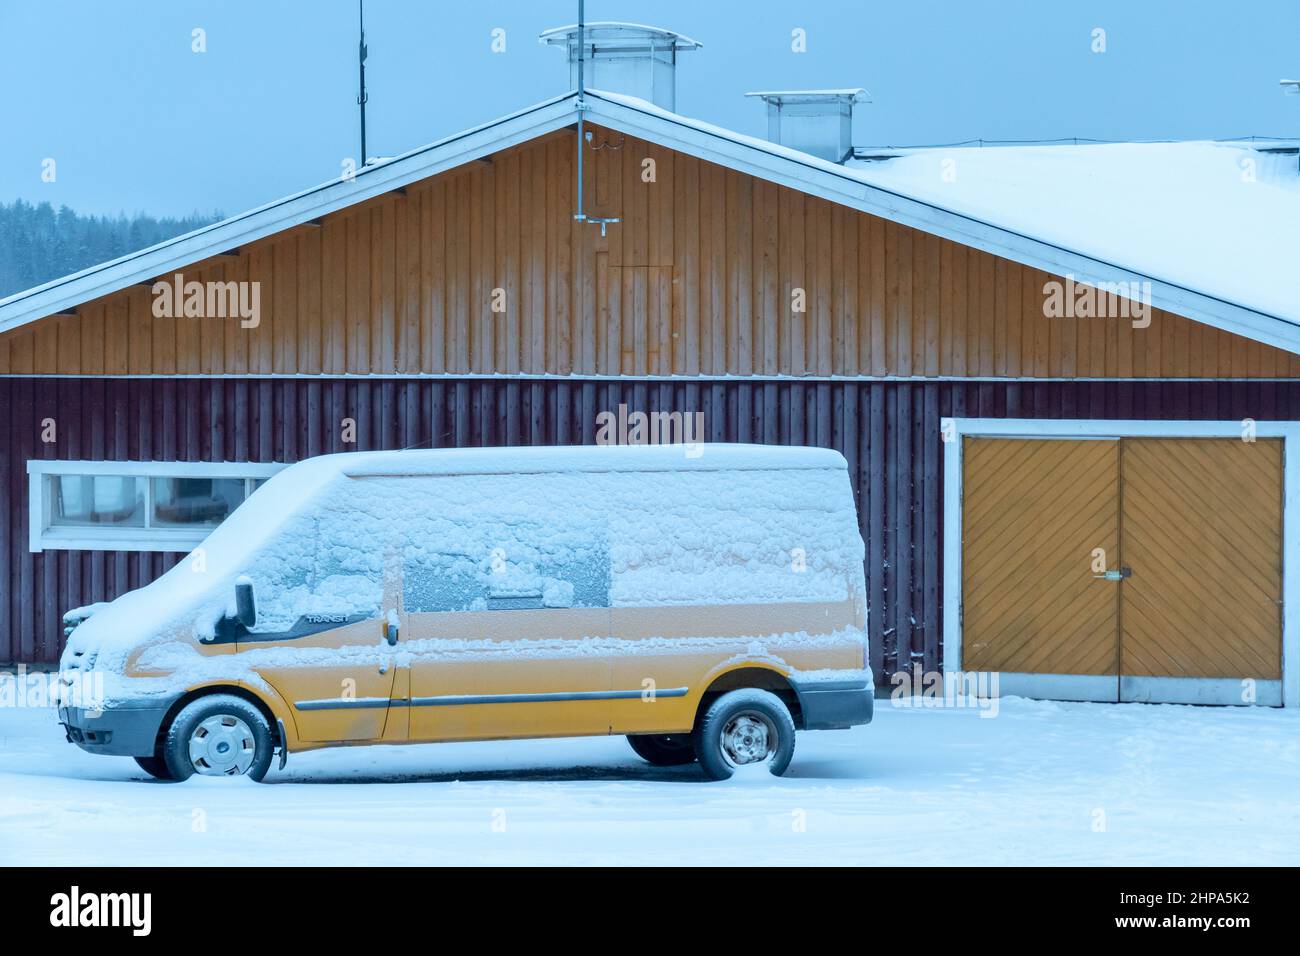 Yellow Ford Transit van covered in snow in front of a colored door of barn in Finland Stock Photo